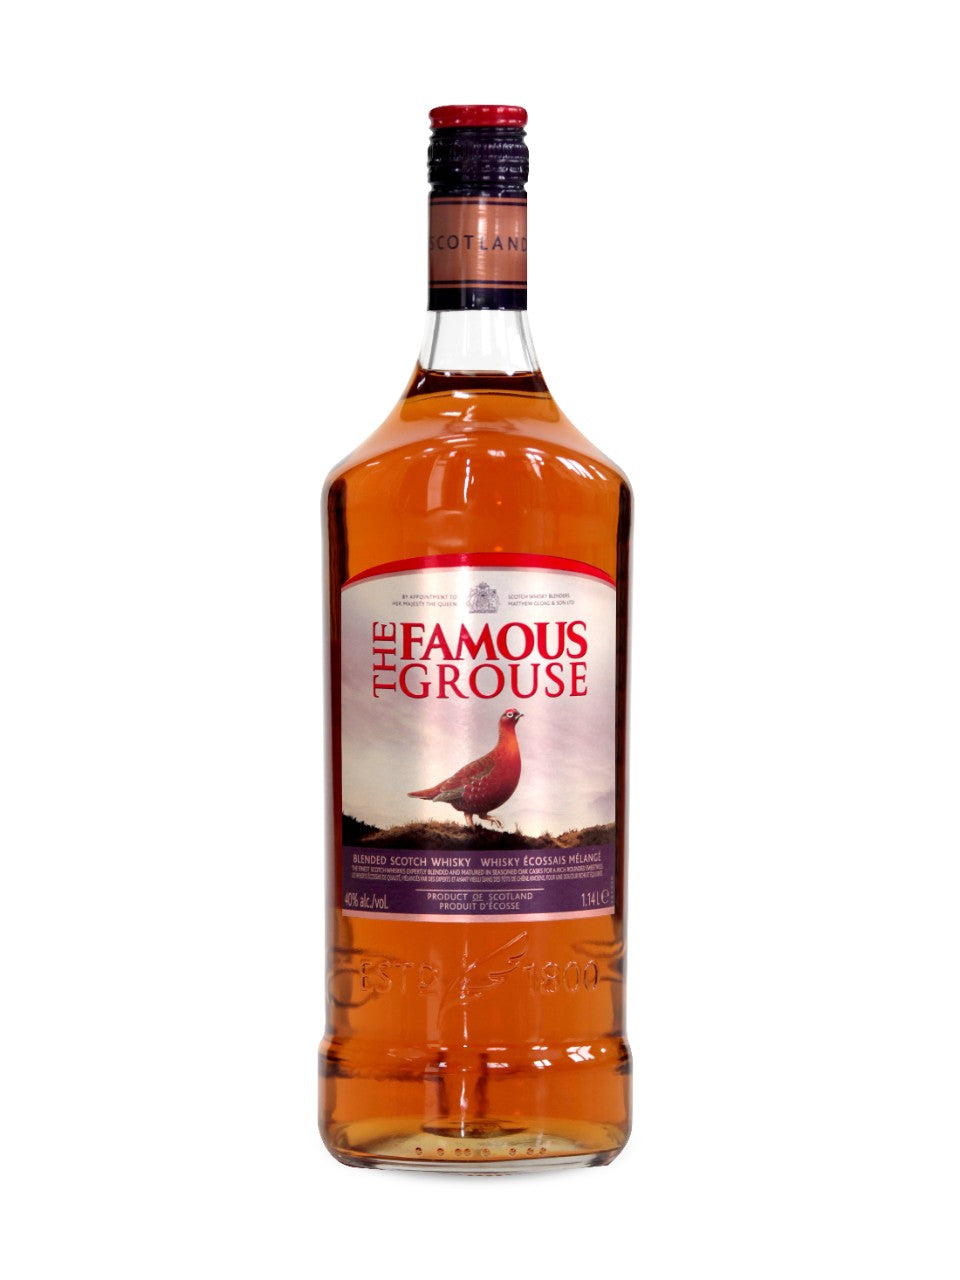 The Famous Grouse Scotch Whisky 1140 mL bottle